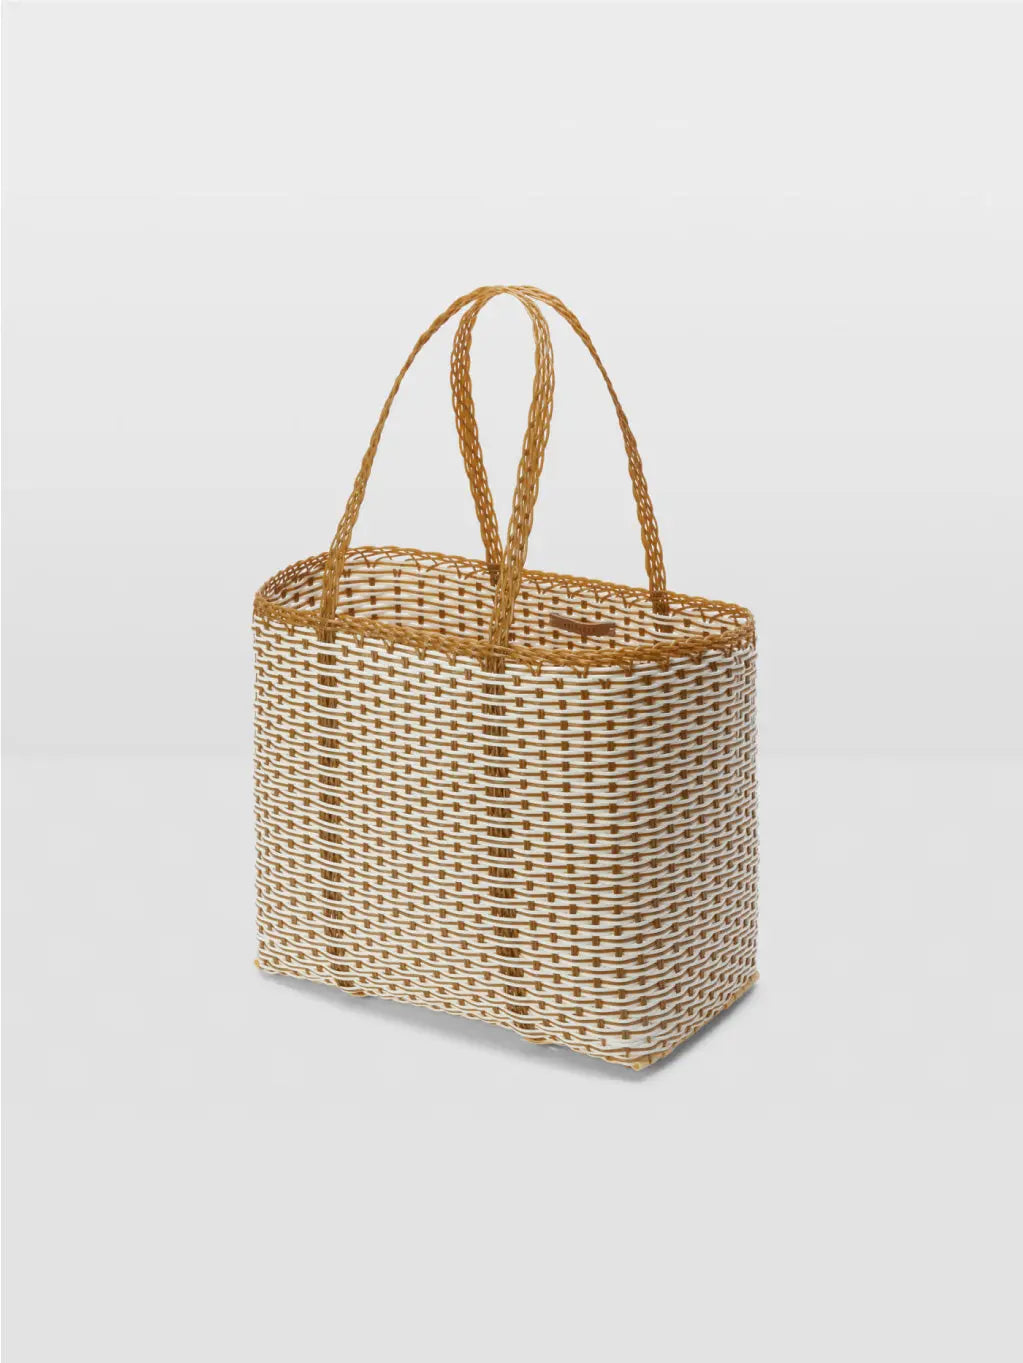 A rectangular wicker basket with two looped handles from Palorosa, featuring a white and natural brown woven pattern. The Trama Tobacco + White Bag is placed on a plain white background, highlighting its texture and craftsmanship inspired by the elegance of Barcelona.